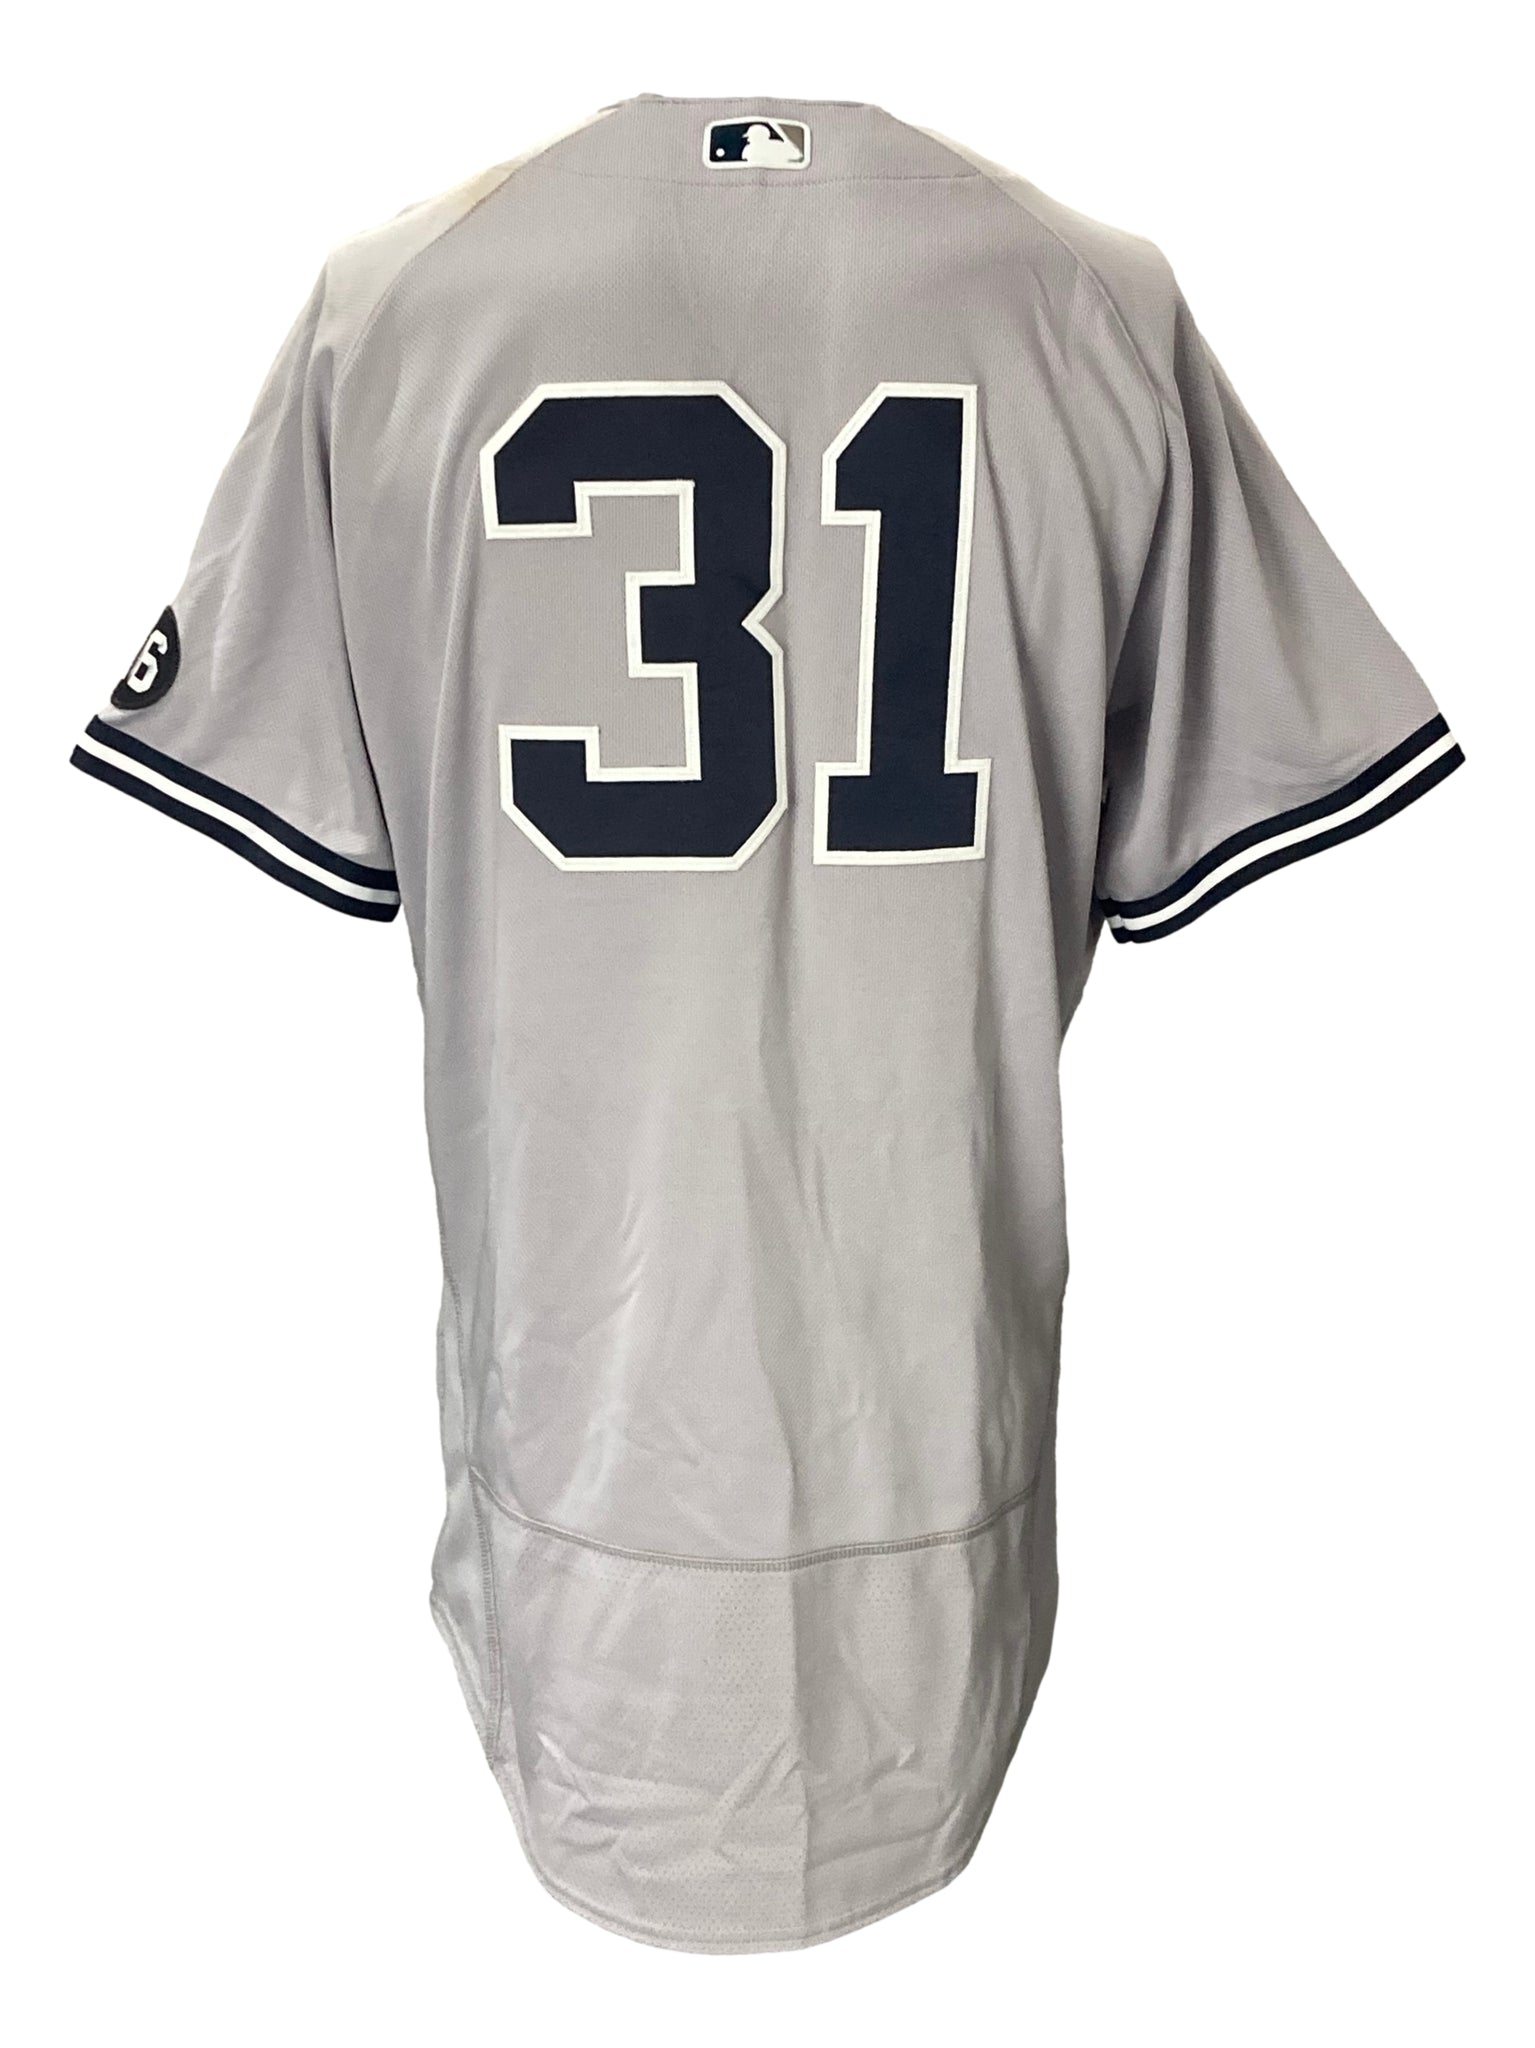 Aaron Hicks Jersey - NY Yankees Replica Adult Road Jersey